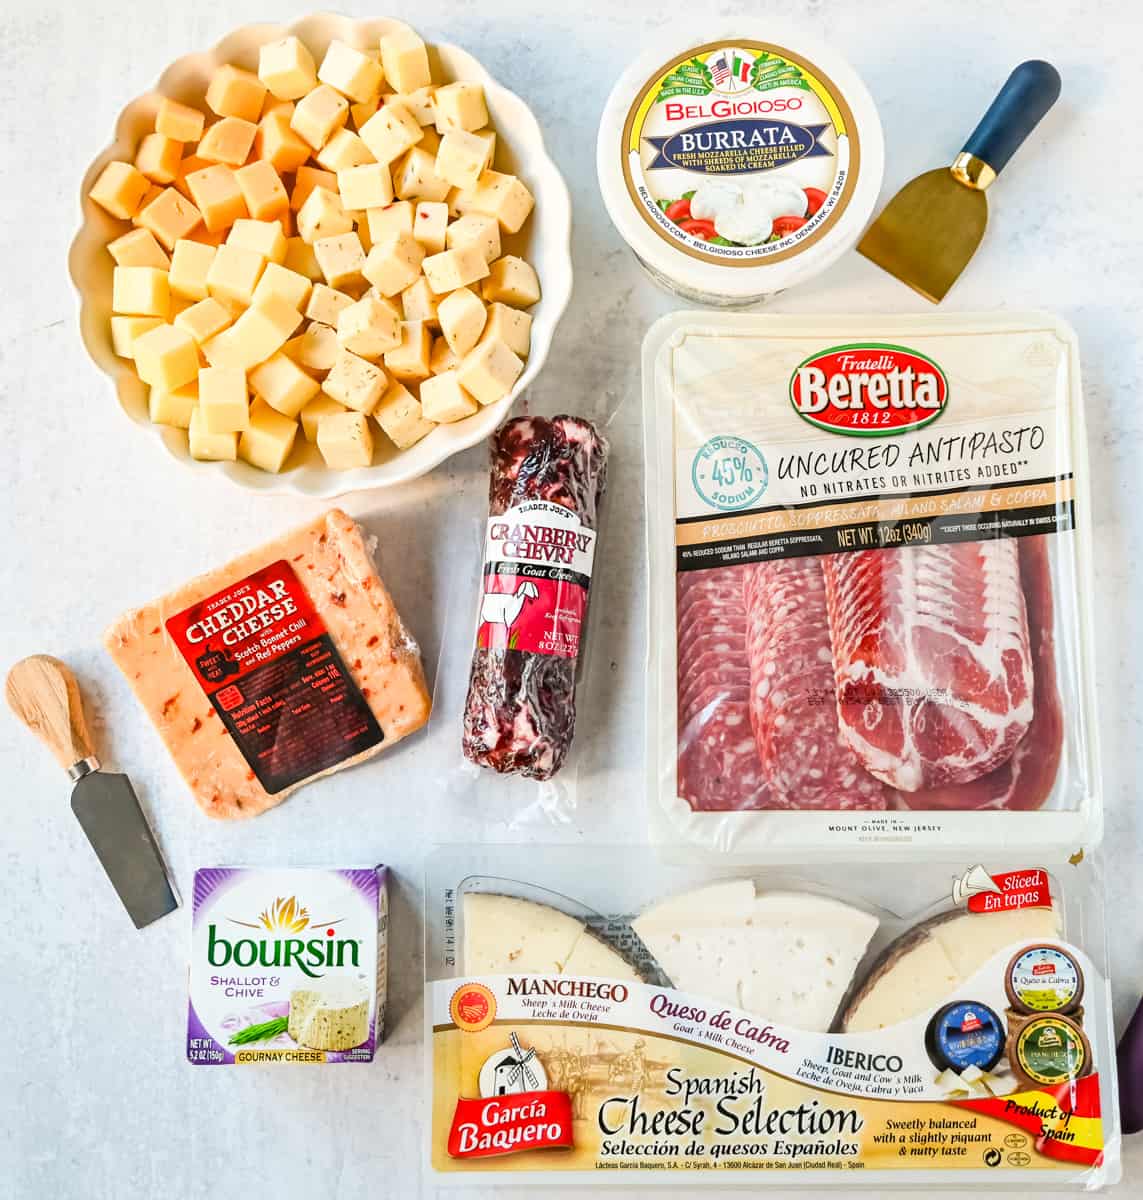 Meats and Cheeses for Charcuterie Board. What cheeses and meats to put on charcuterie board